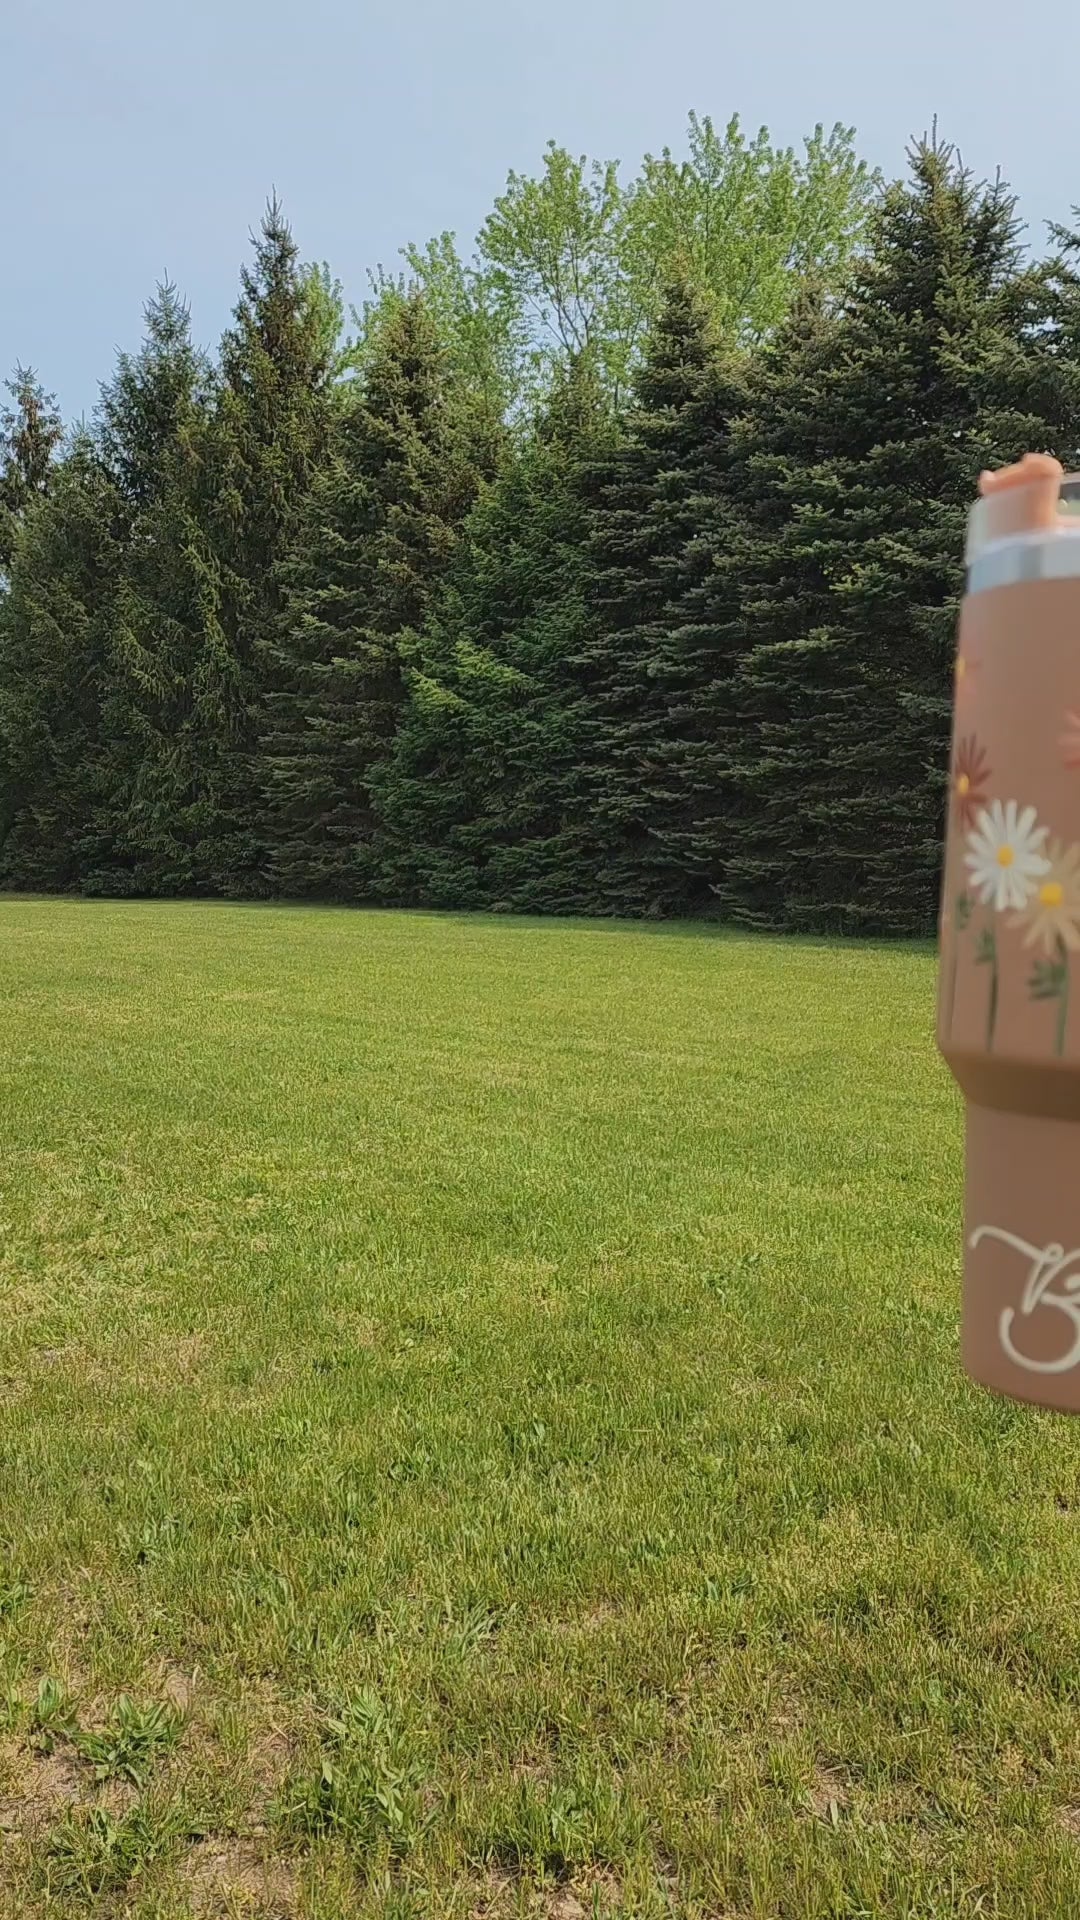 Tan neutral 40oz tumbler with painted dasies,Women's Christmas Gift, Stanley Dupe with hand painted flowers, "Bloom", one of a kind floral design, water bottle